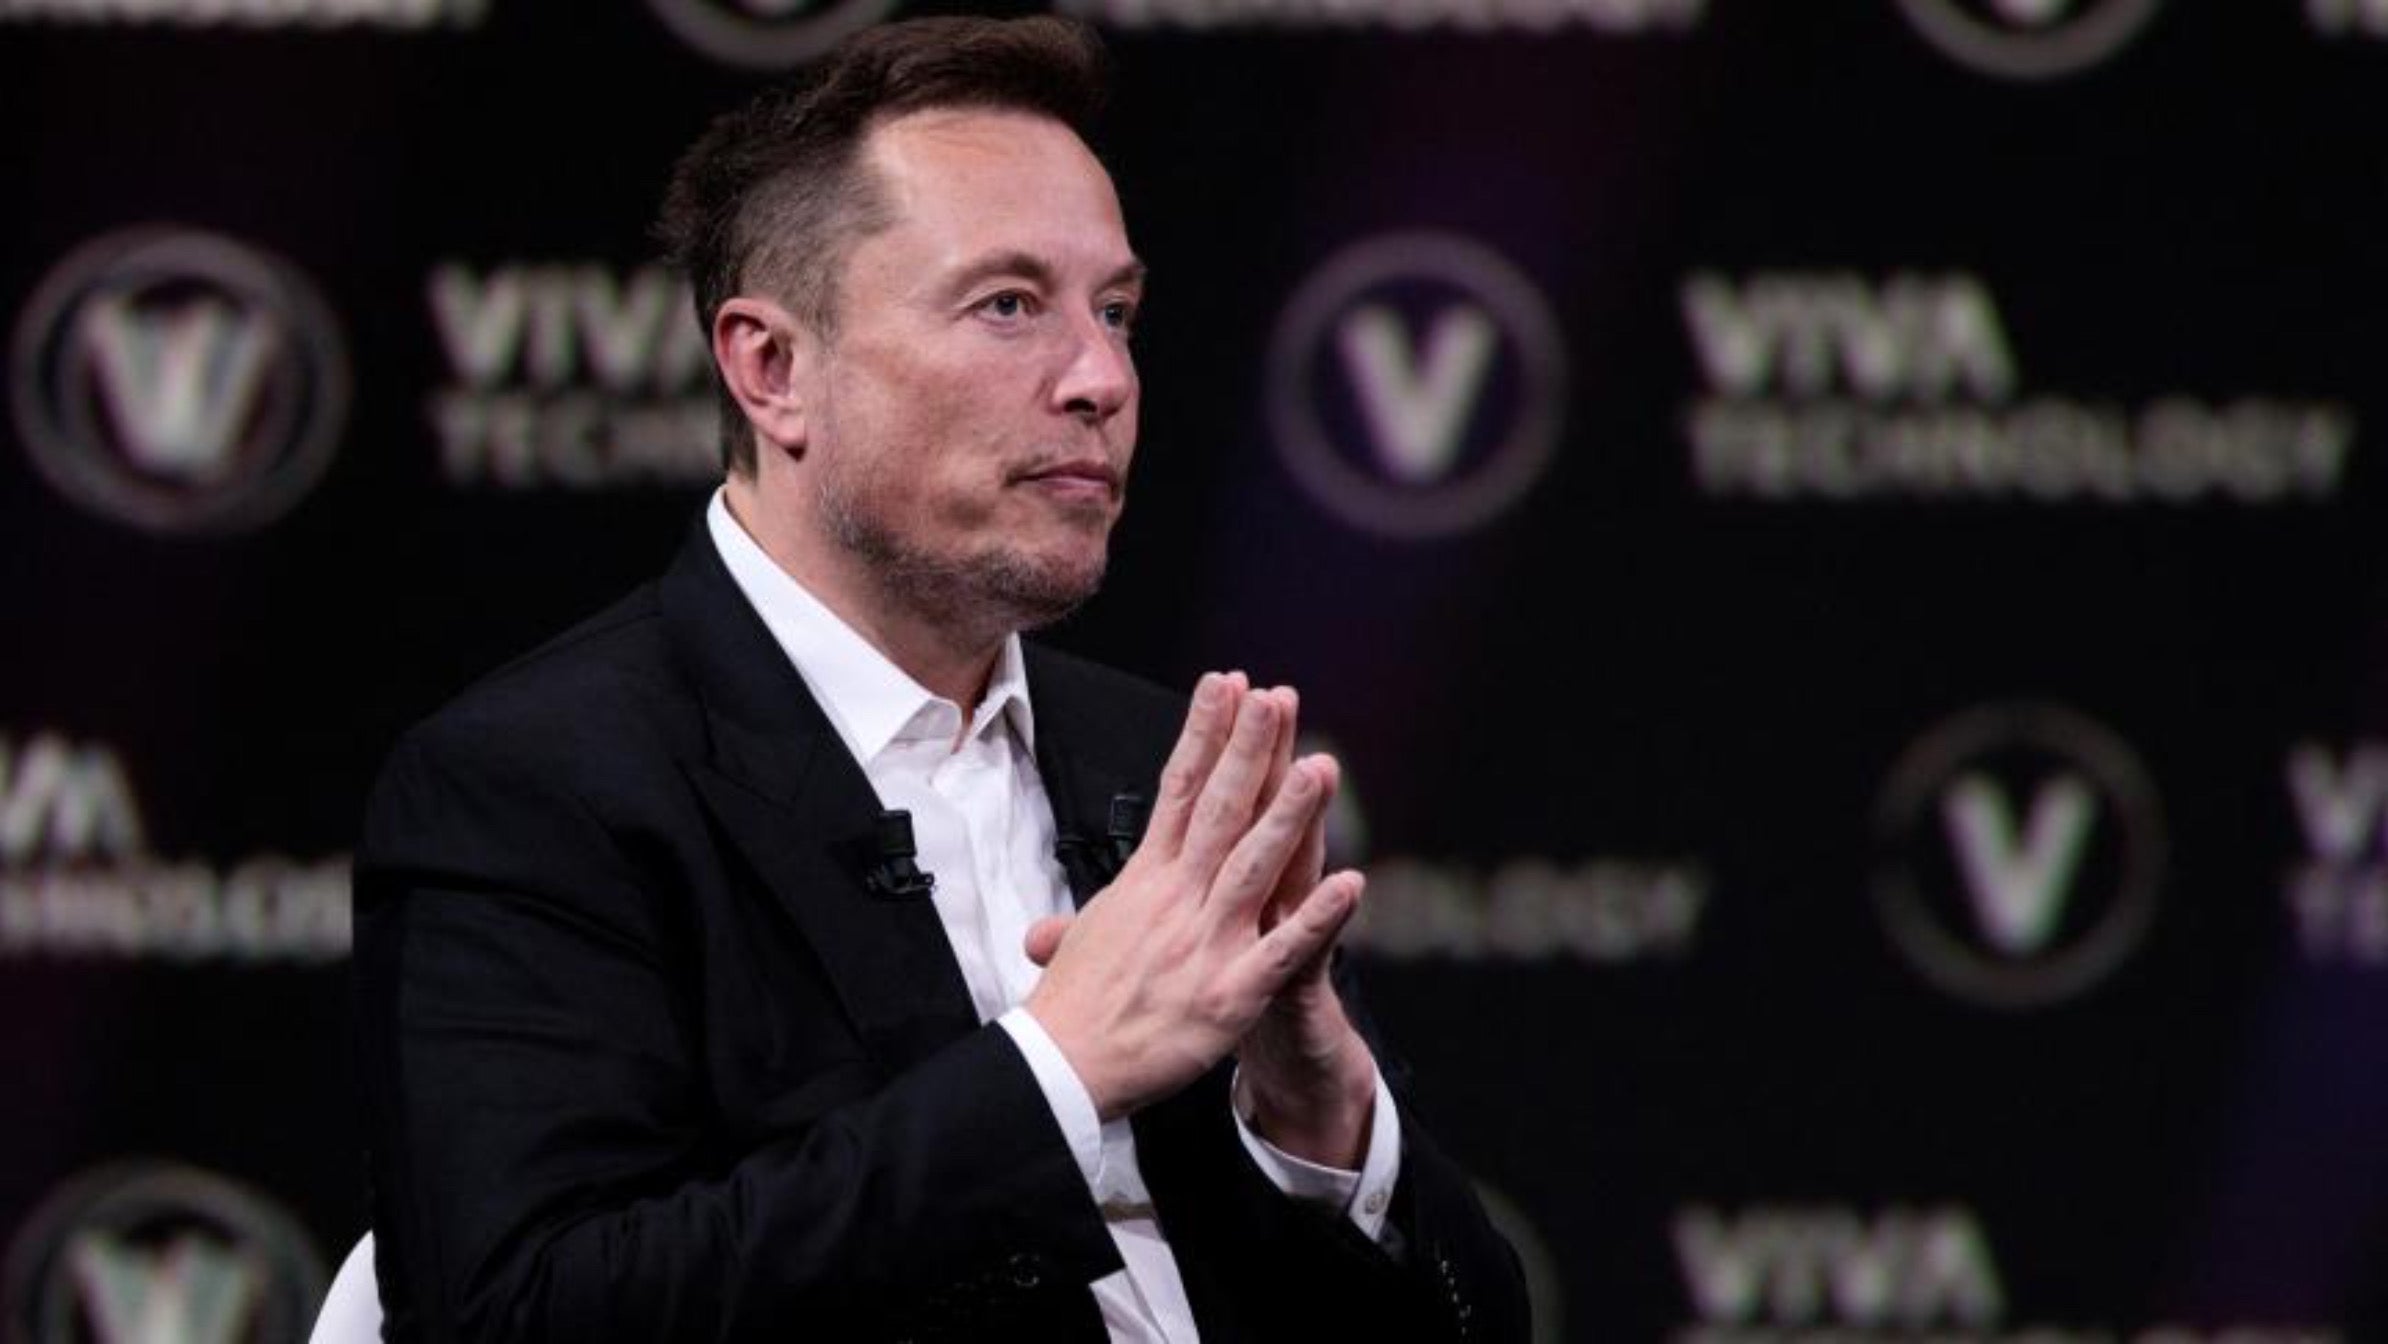 Elon Musk considers a Tesla project in France &#8220;very likely&#8221;: &#8220;There&#8217;s a lot of talent »., Magnate Daily